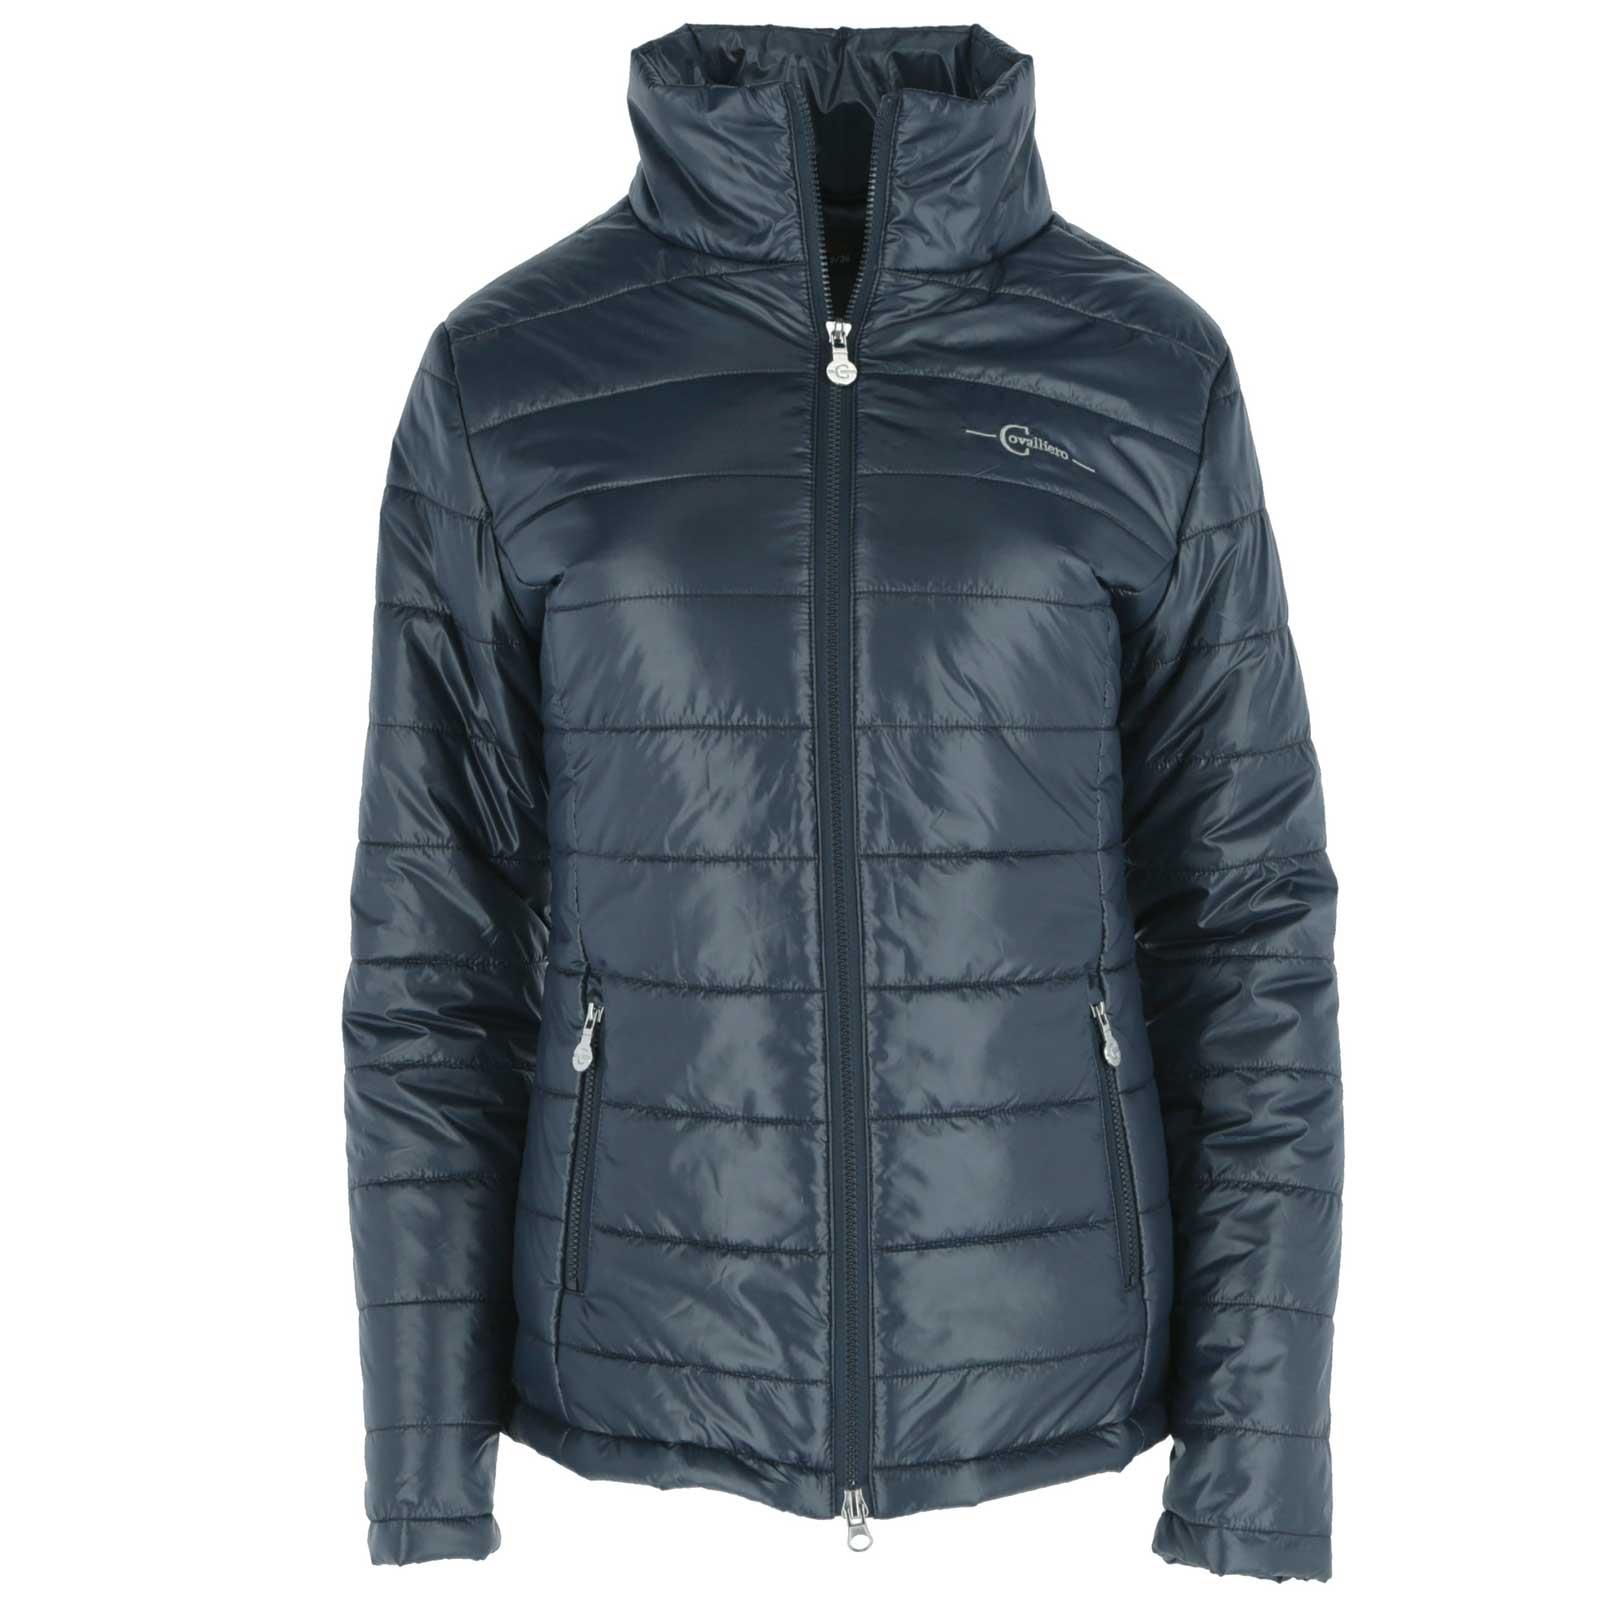 Covalliero quilted riding jacket for ladies